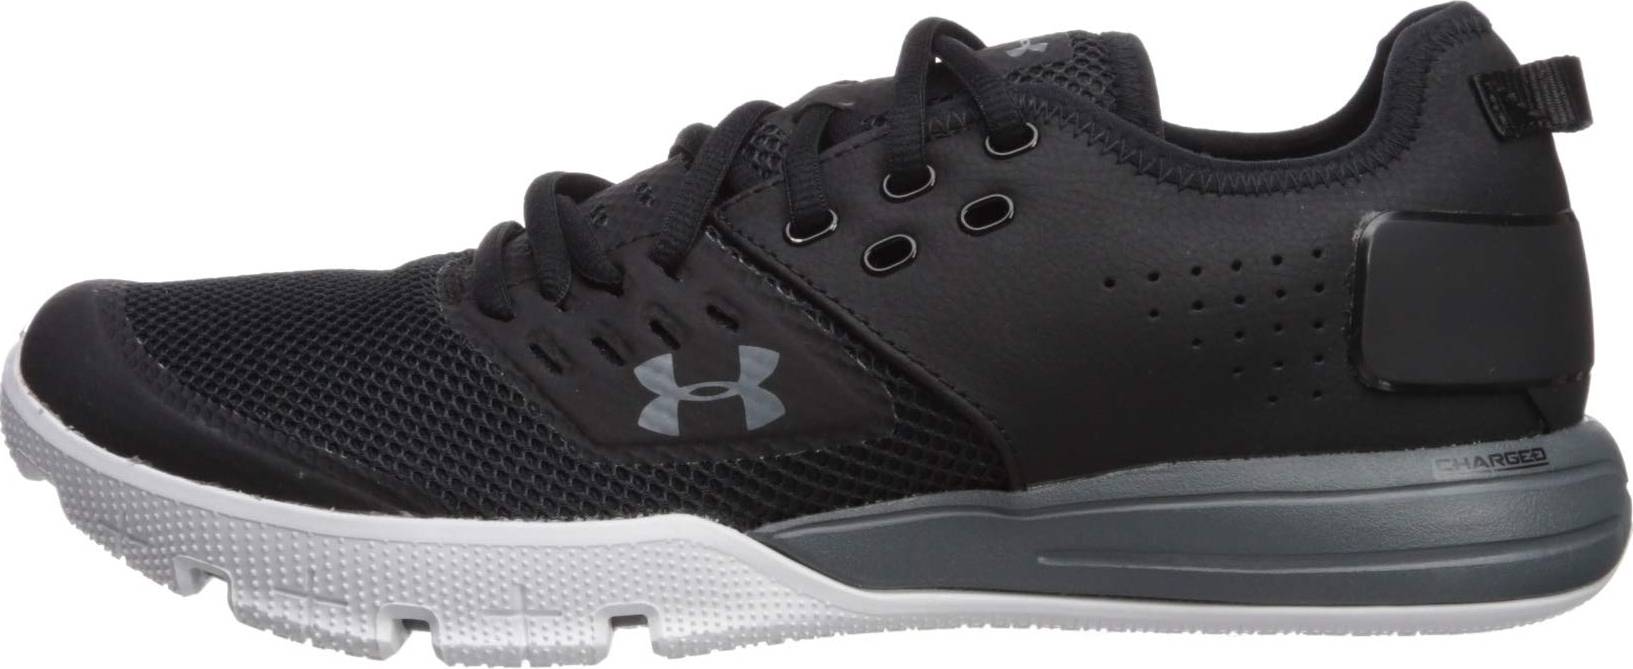 Under Armour Charged Ultimate 3.0 